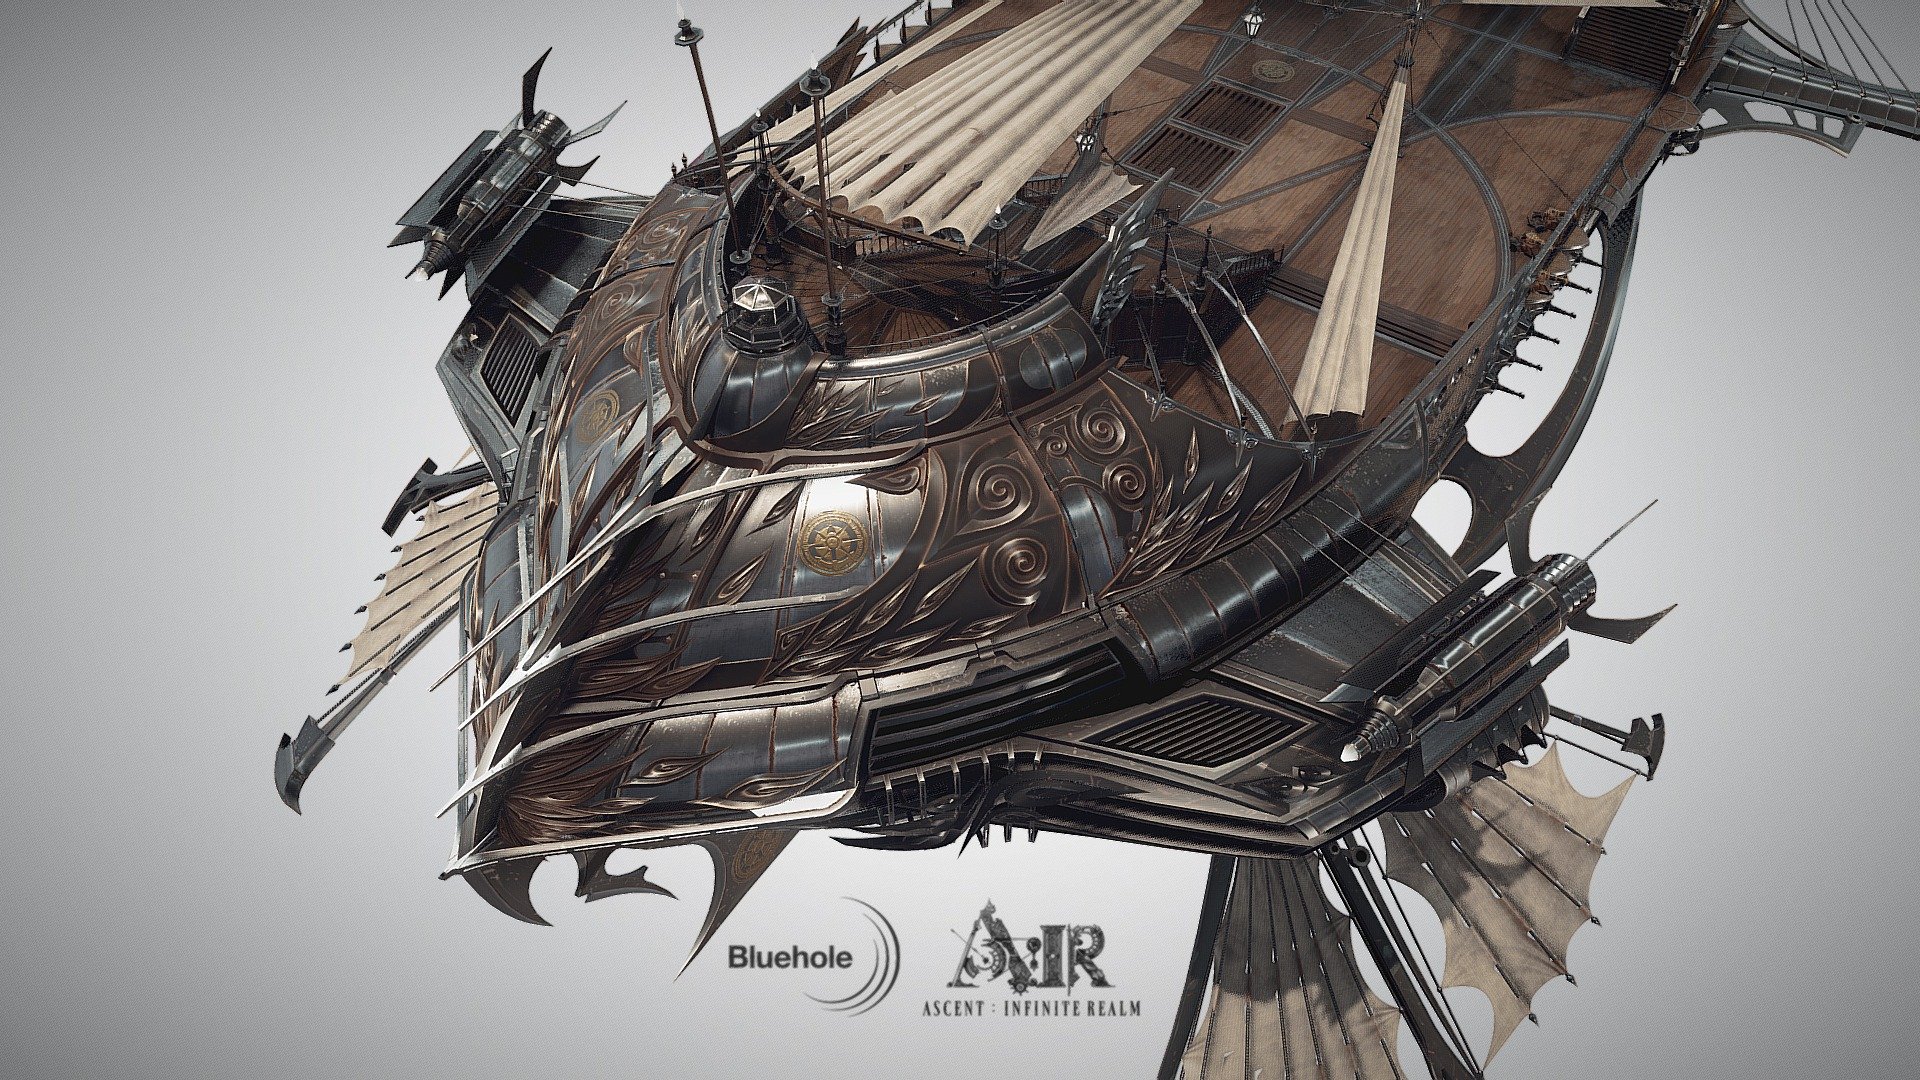 An airship model created for Ascent: Infinite Realm videogame developed by Bluehole.

Modelled in Blender, textured with Photoshop and Substance Painter 2.

It's both a vehicle and an environment asset in the game. Modelled in about 4-5 months including additional designs.

Concept provided by Bluehole, further developed by Jula Arendt - Ascent: Infinite Realm: Airship (Official) - 3D model by Karol Miklas (@karolmiklas) 3d model